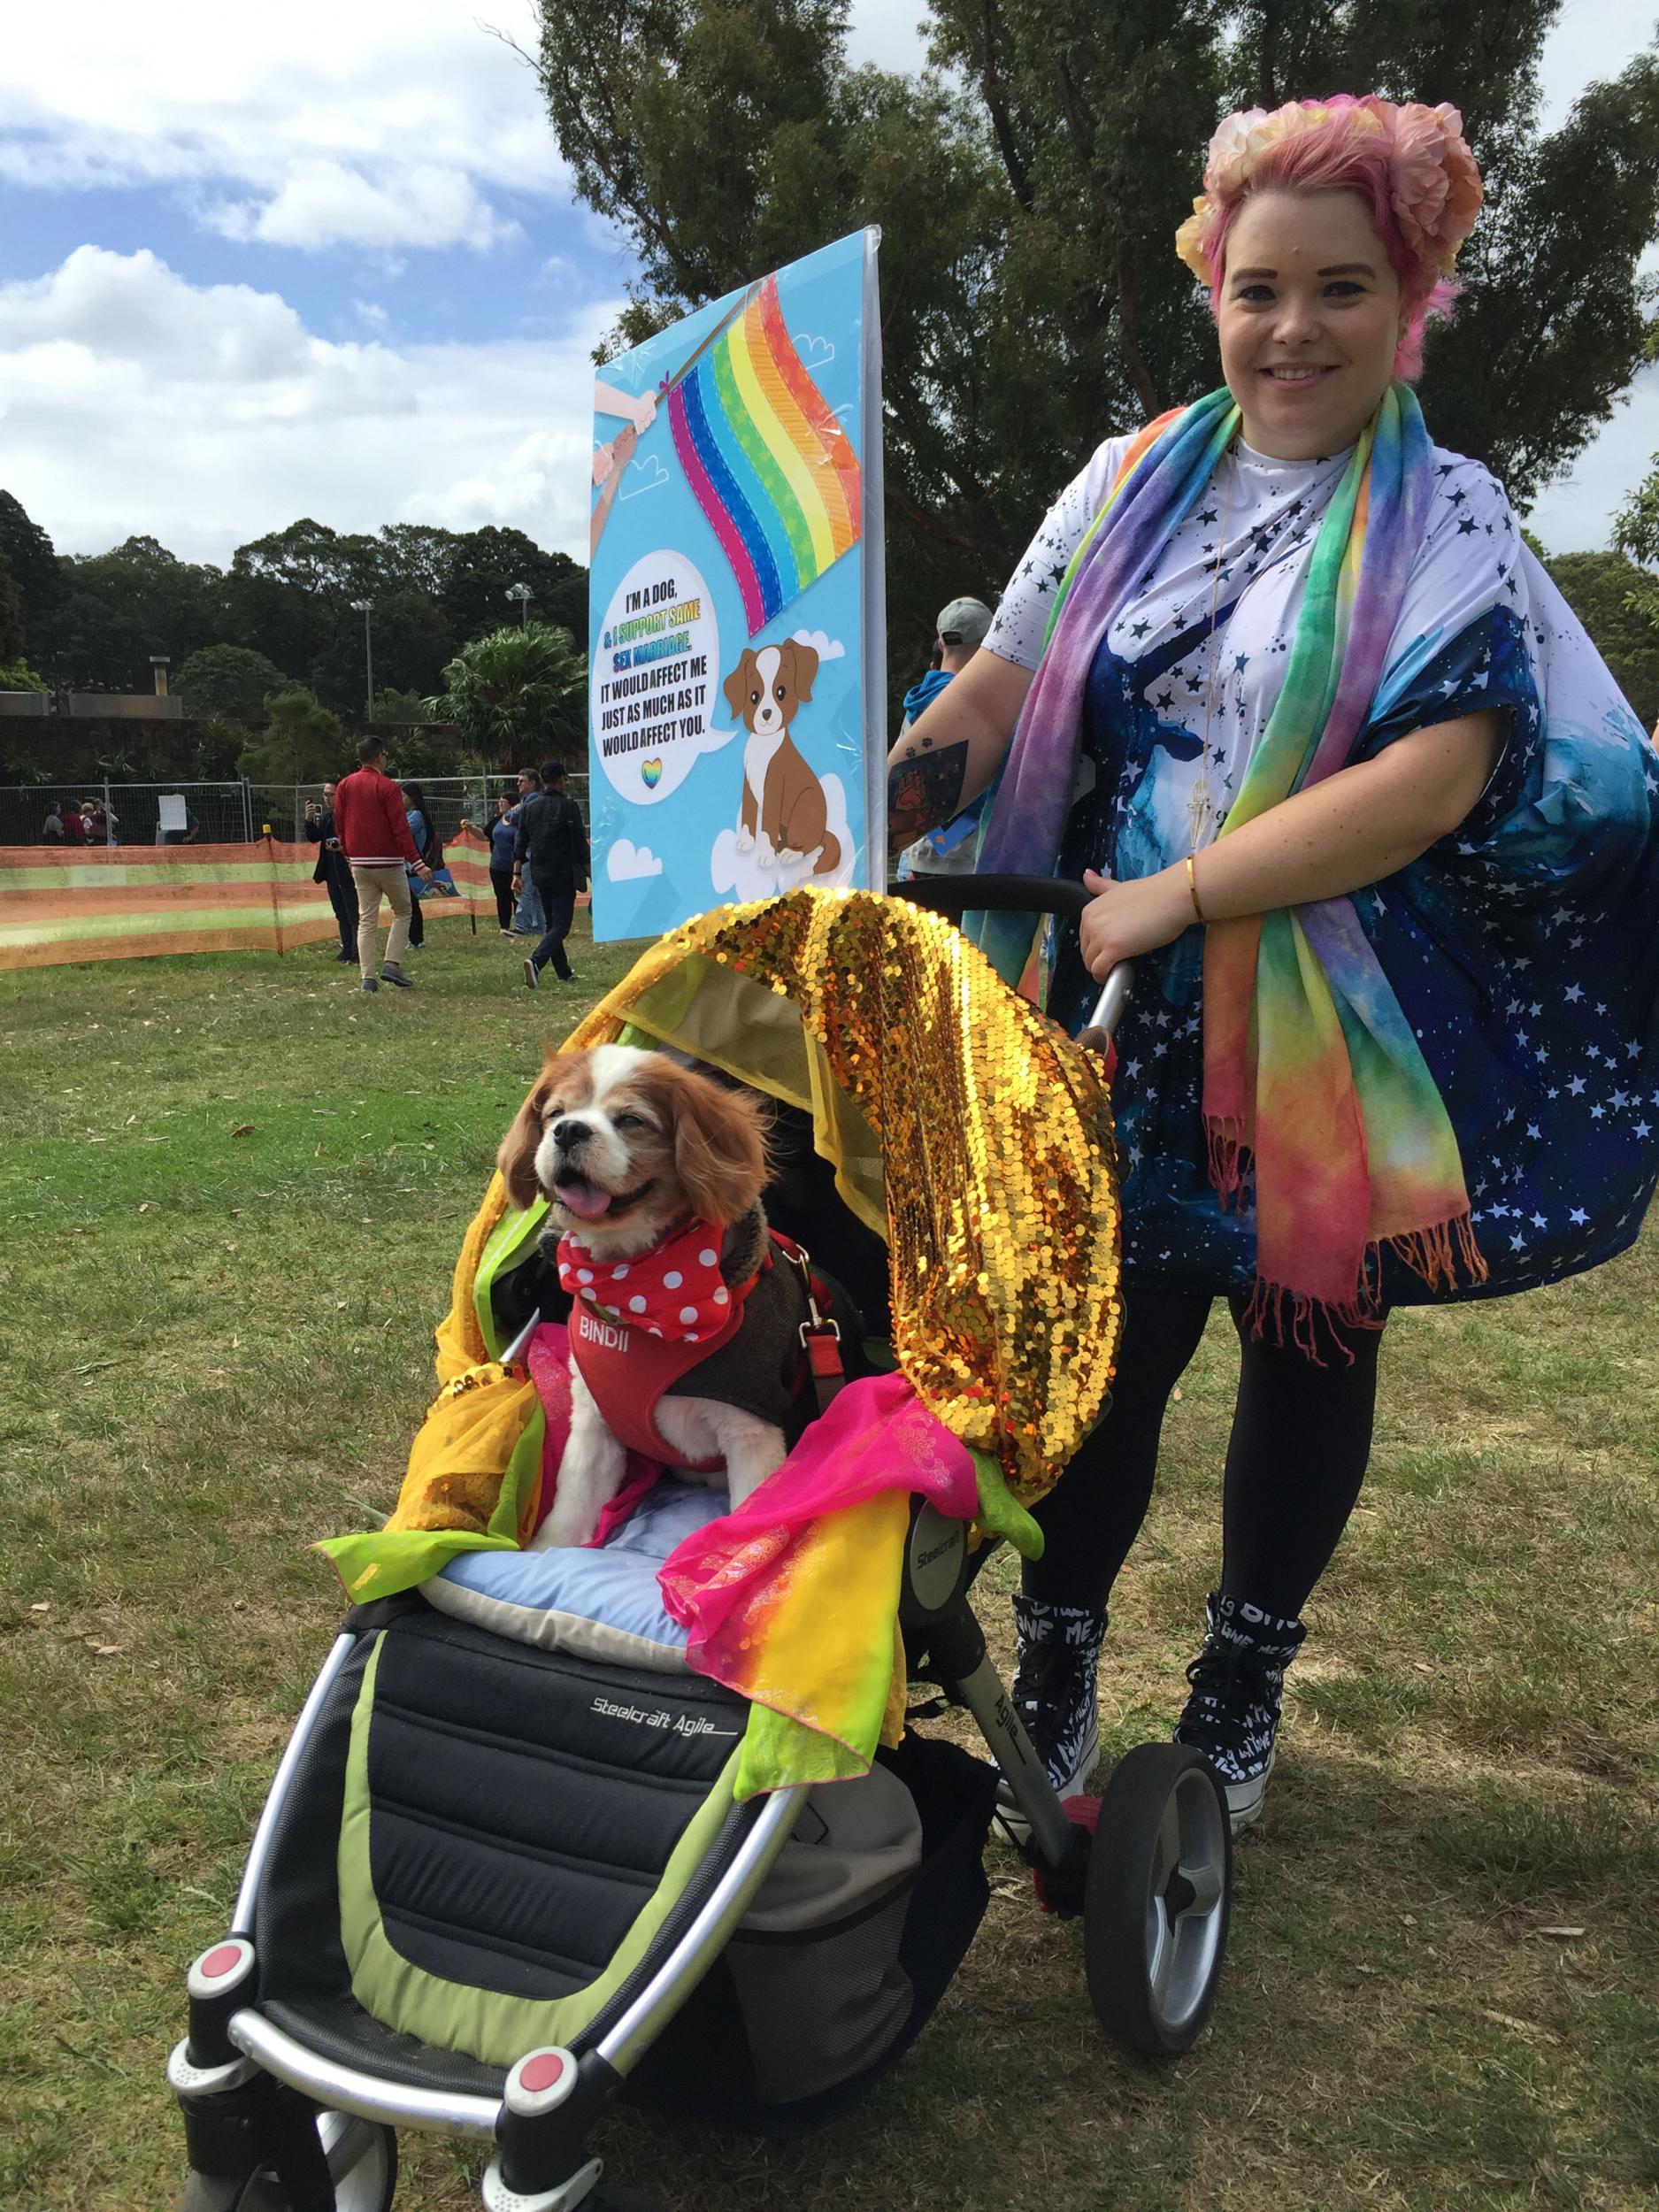 Dannie, and her dog Bindy, joined crowds in Sydney late last month